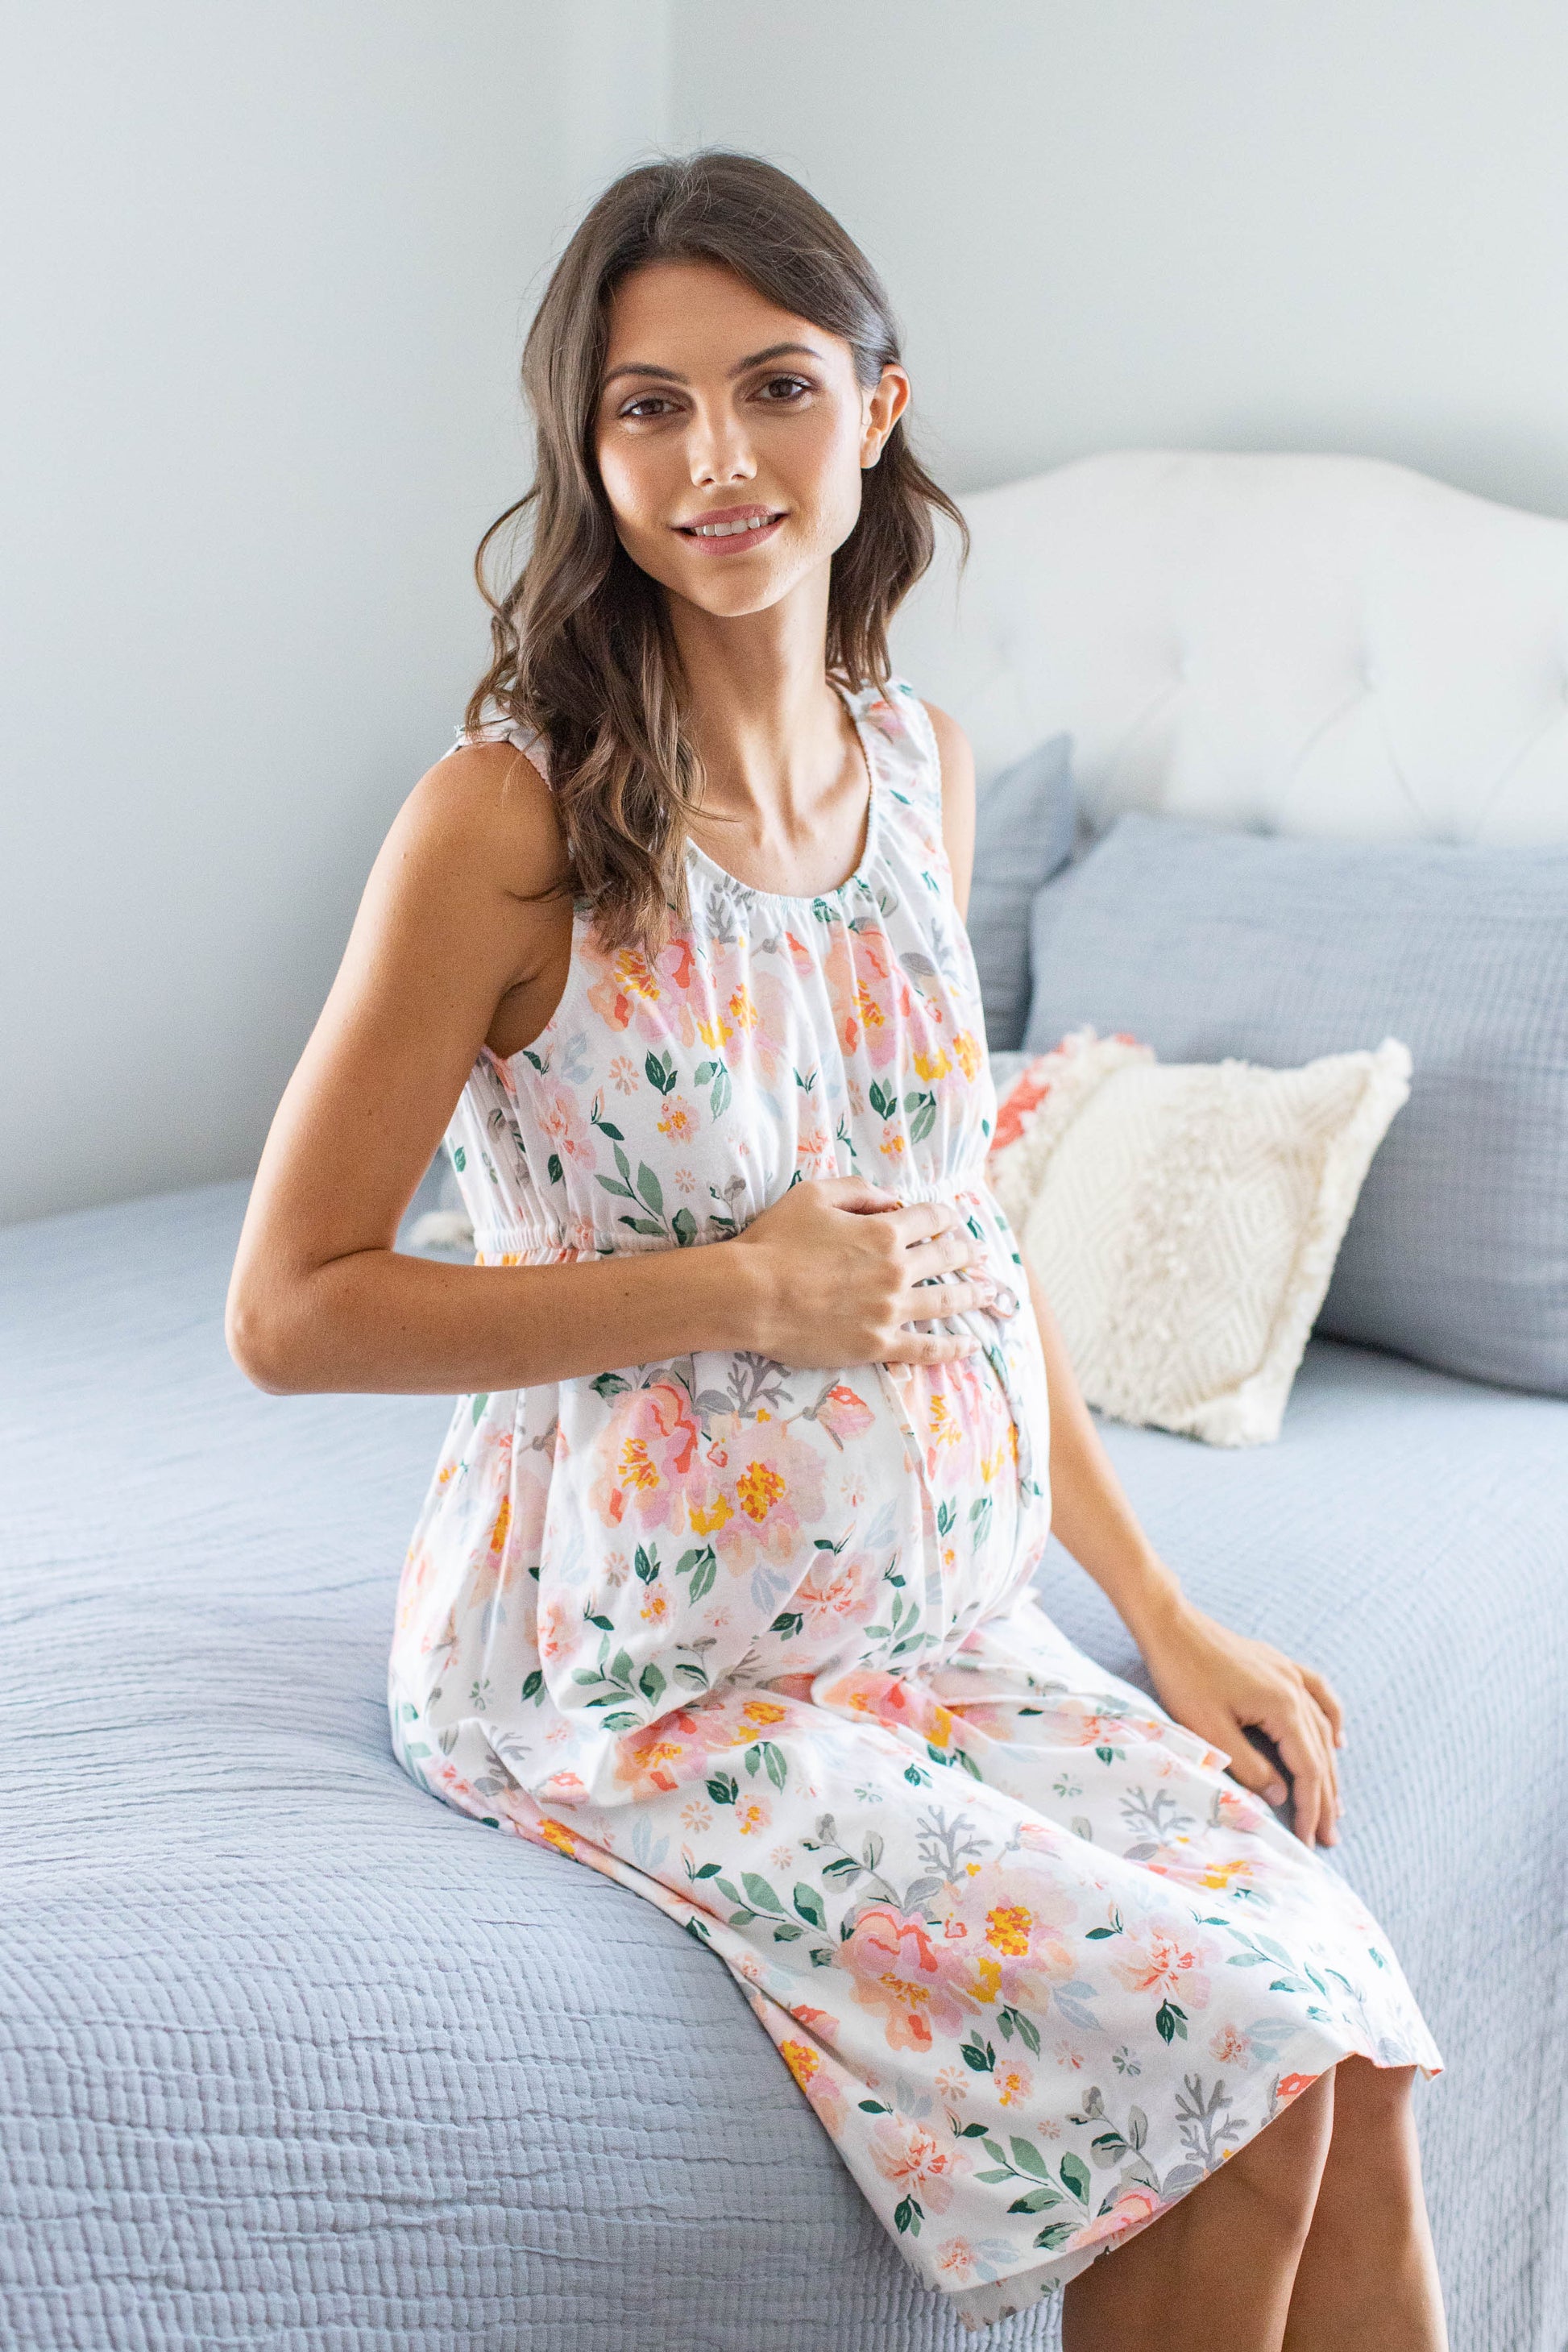 3 in 1 Labor Gowns – Gownies™